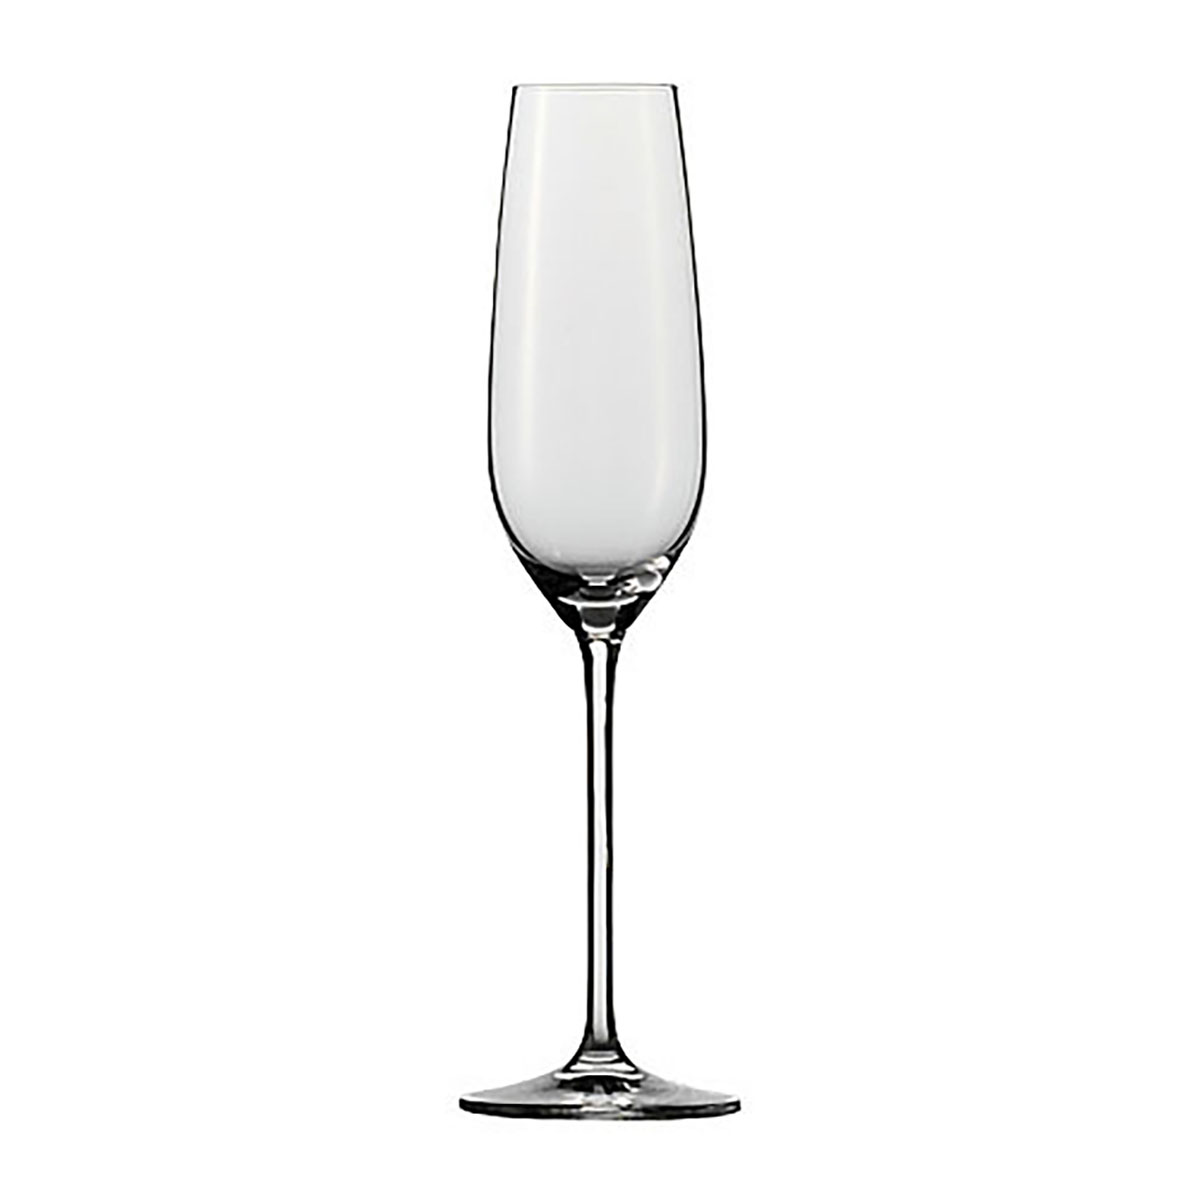 Schott Zwiesel Tritan Crystal, Fortissimo Champagne Crystal Flute, Set of Six